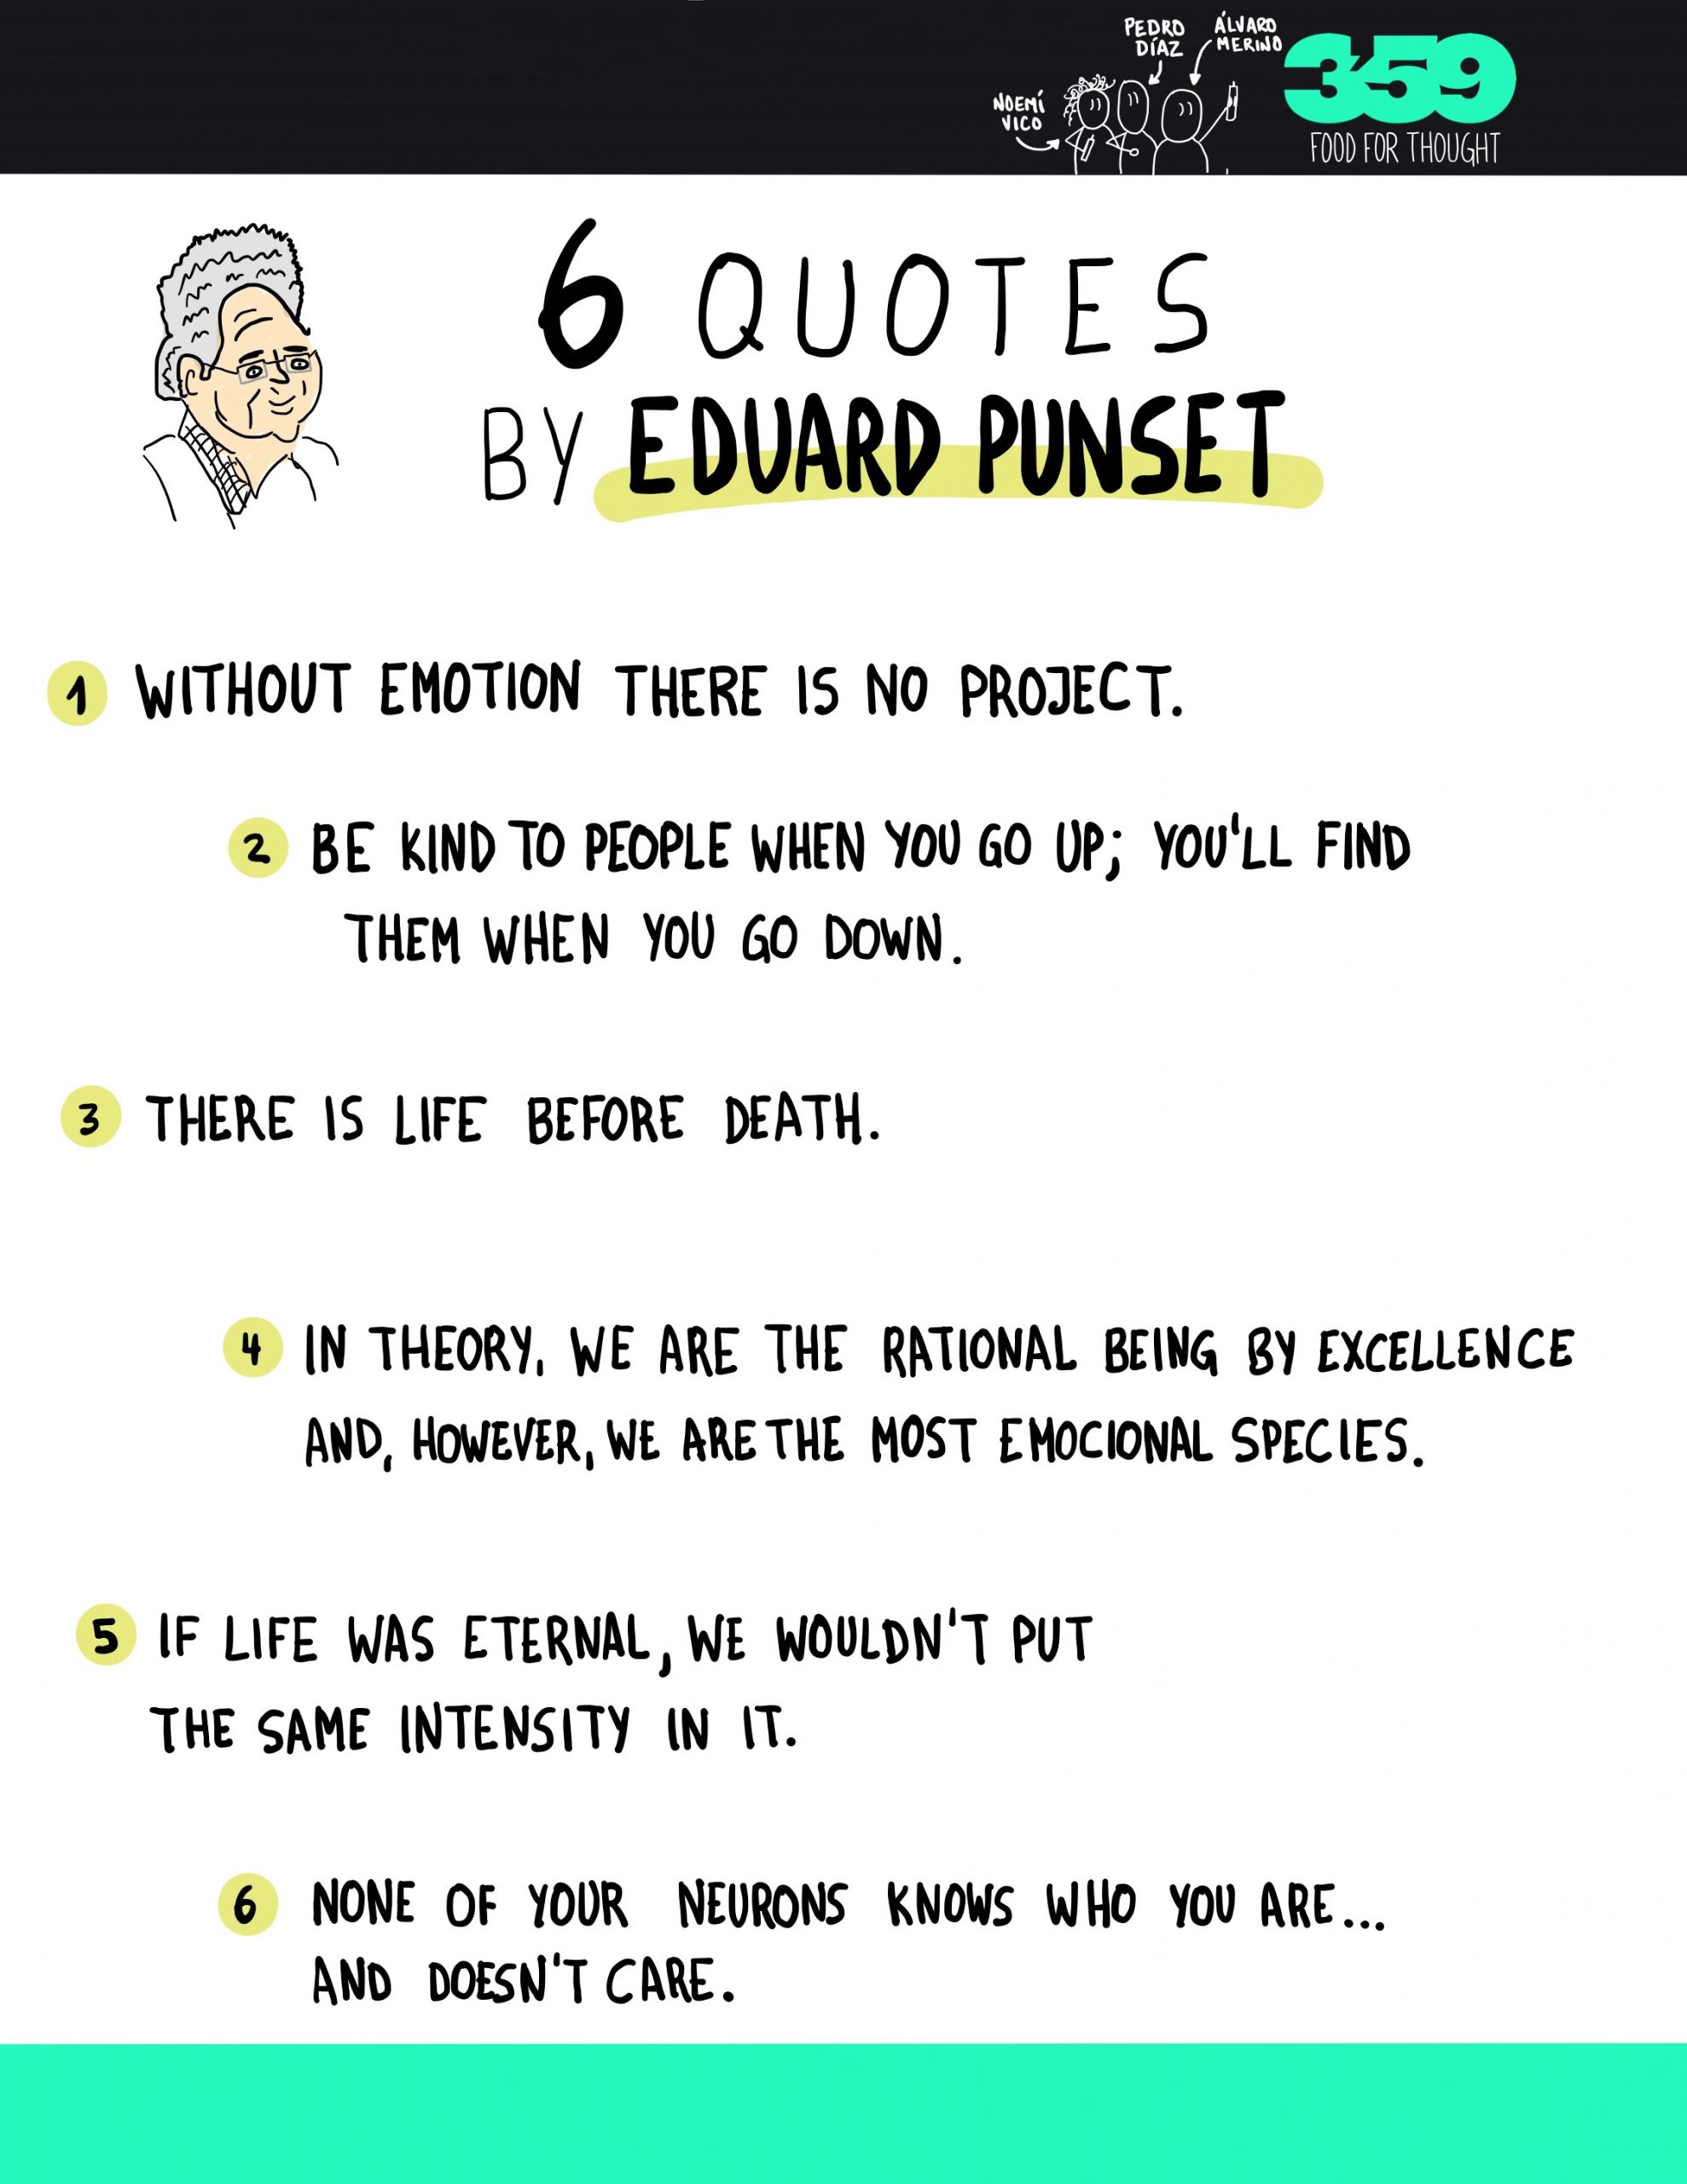 6 Quotes by Eduard Punset